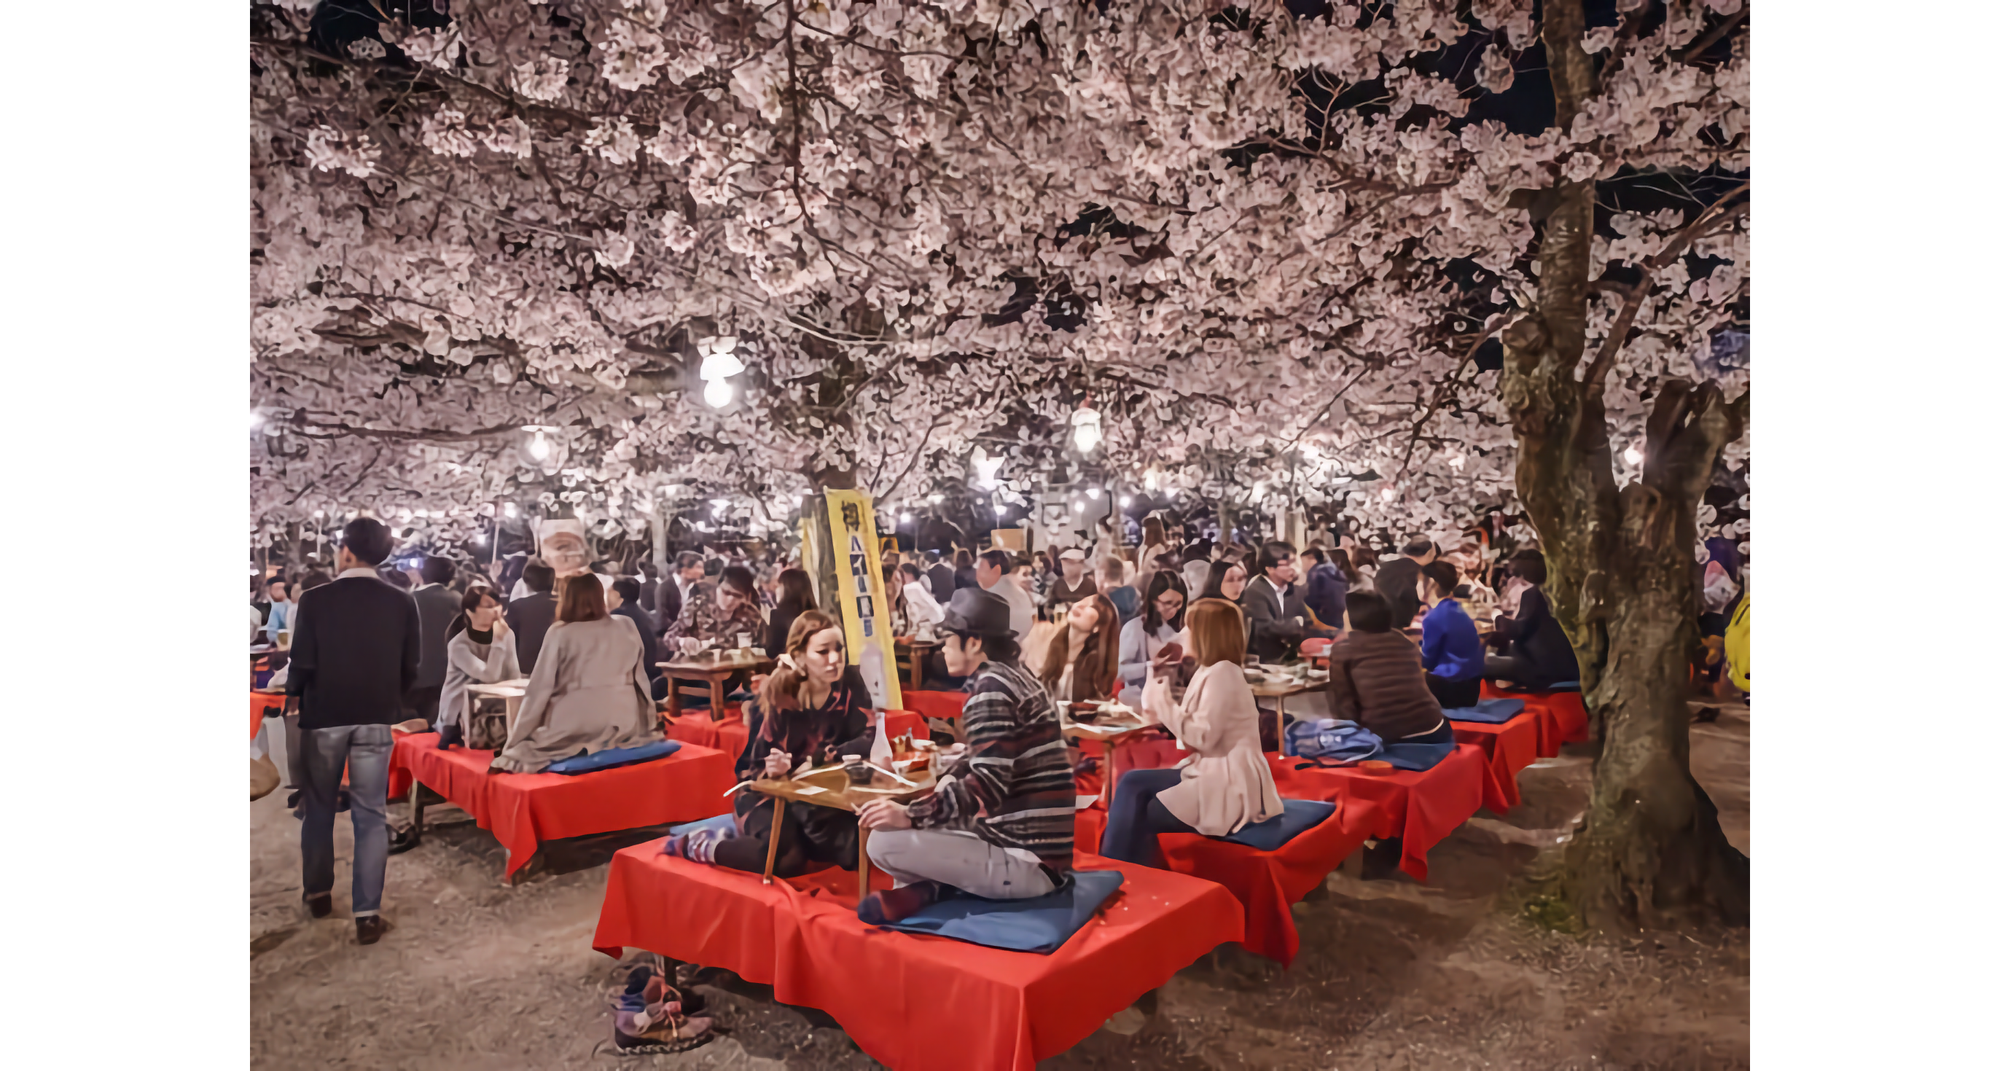 Photo of Japanese revelers sitting at low red-covered tables underneath cherry trees filled with blossoms